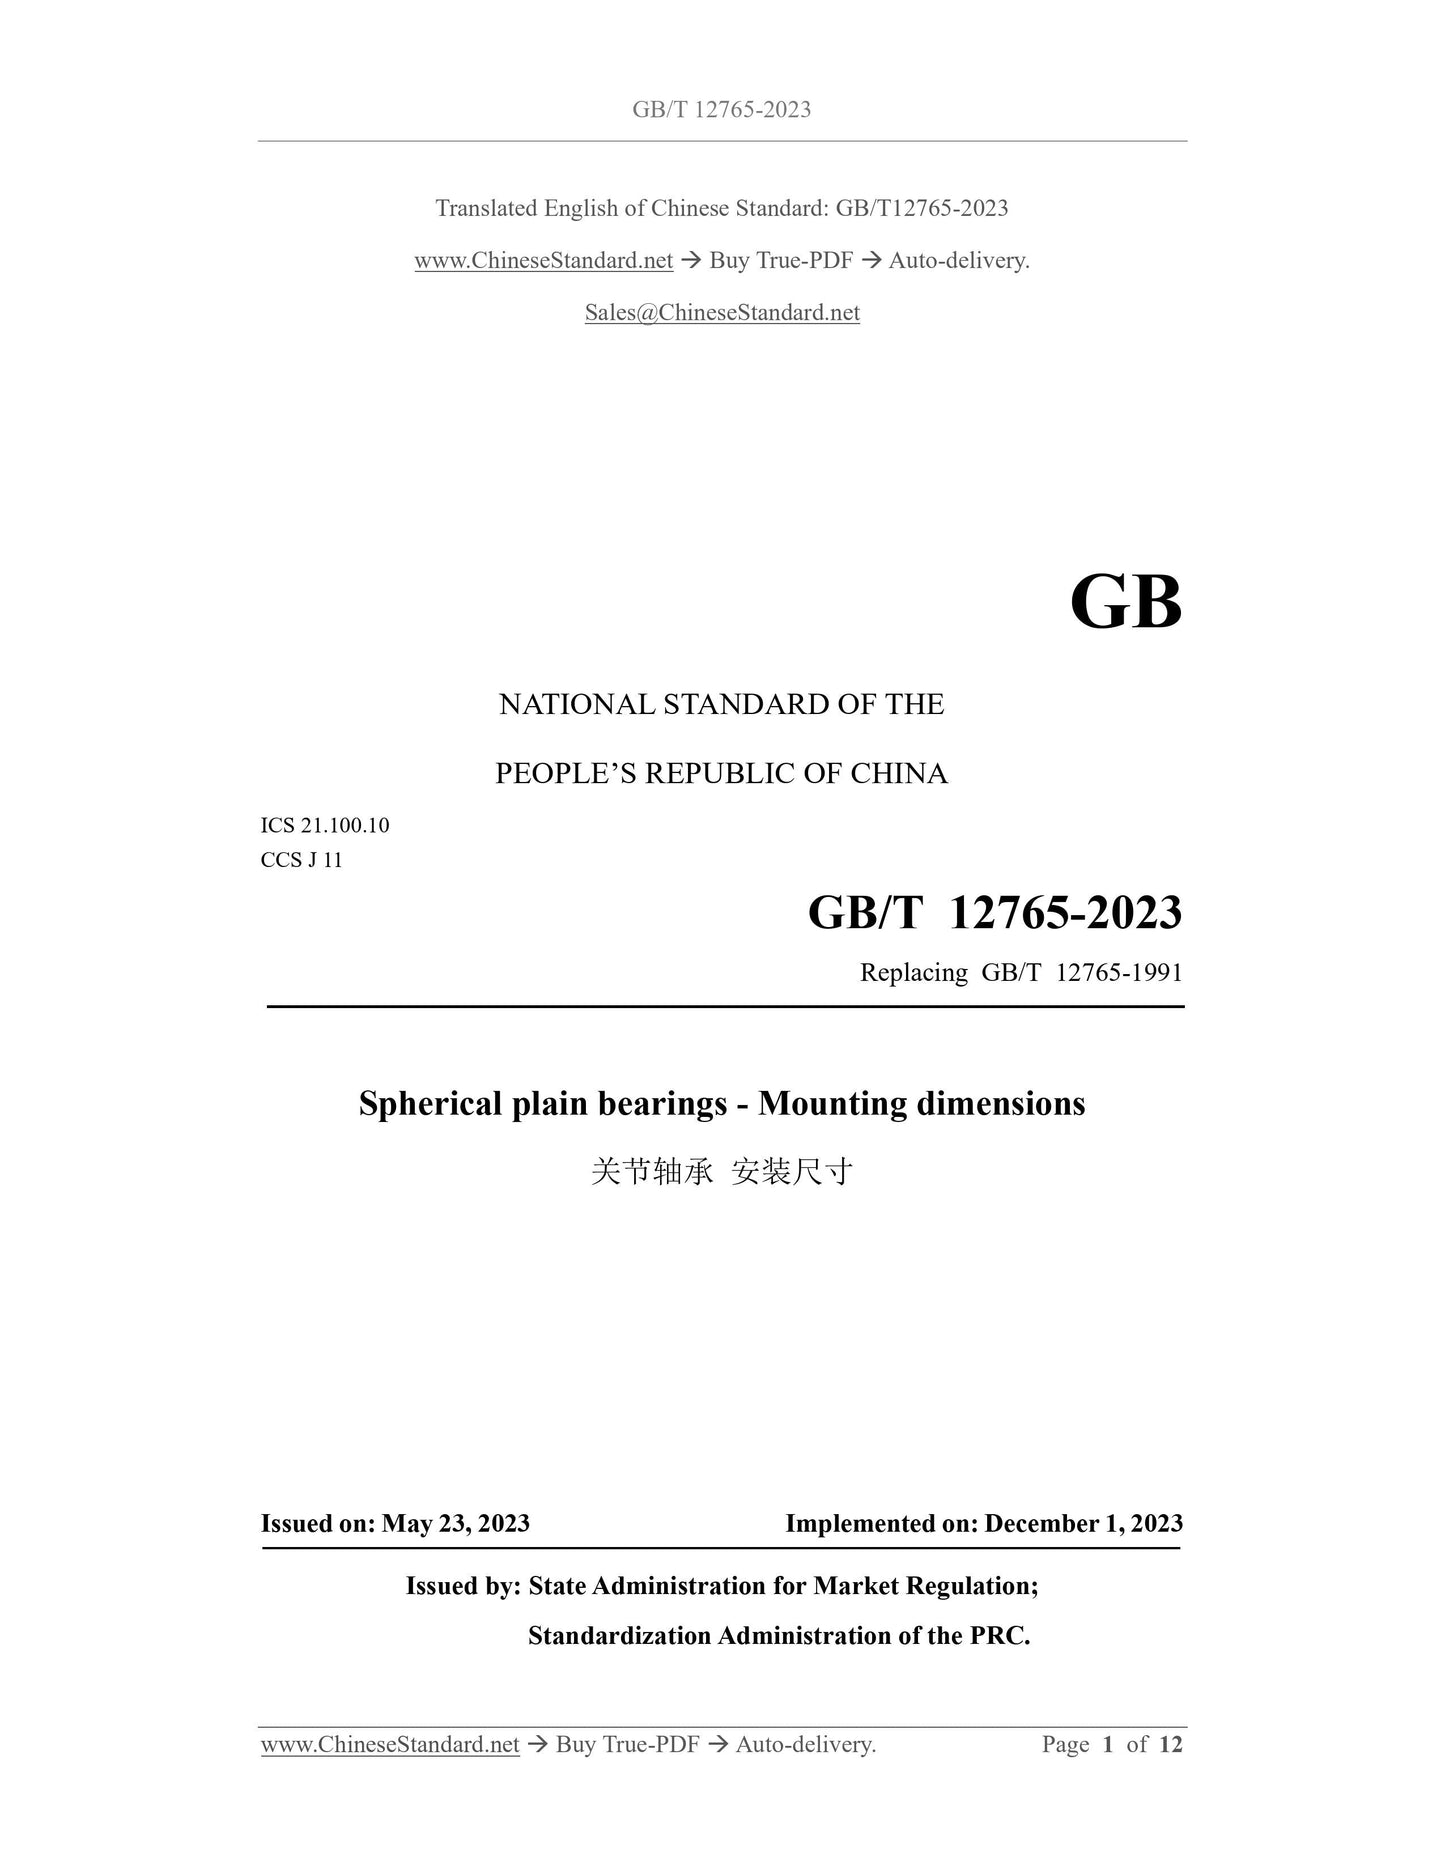 GB/T 12765-2023 Page 1